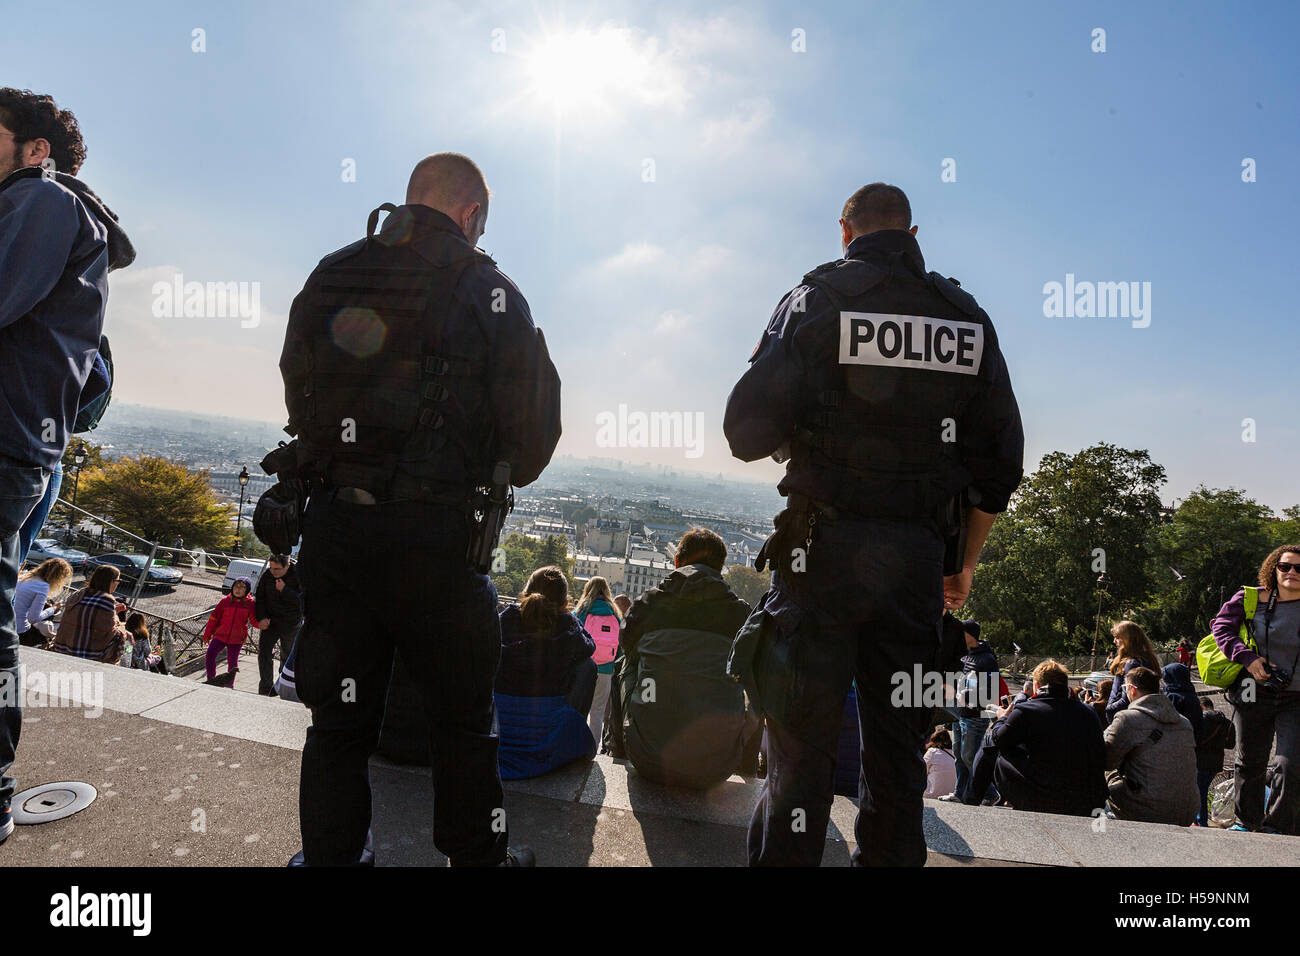 French police patrol the area around the popular tourist attraction Sacre Coeur, Paris, as part of the state of emergency. Stock Photo